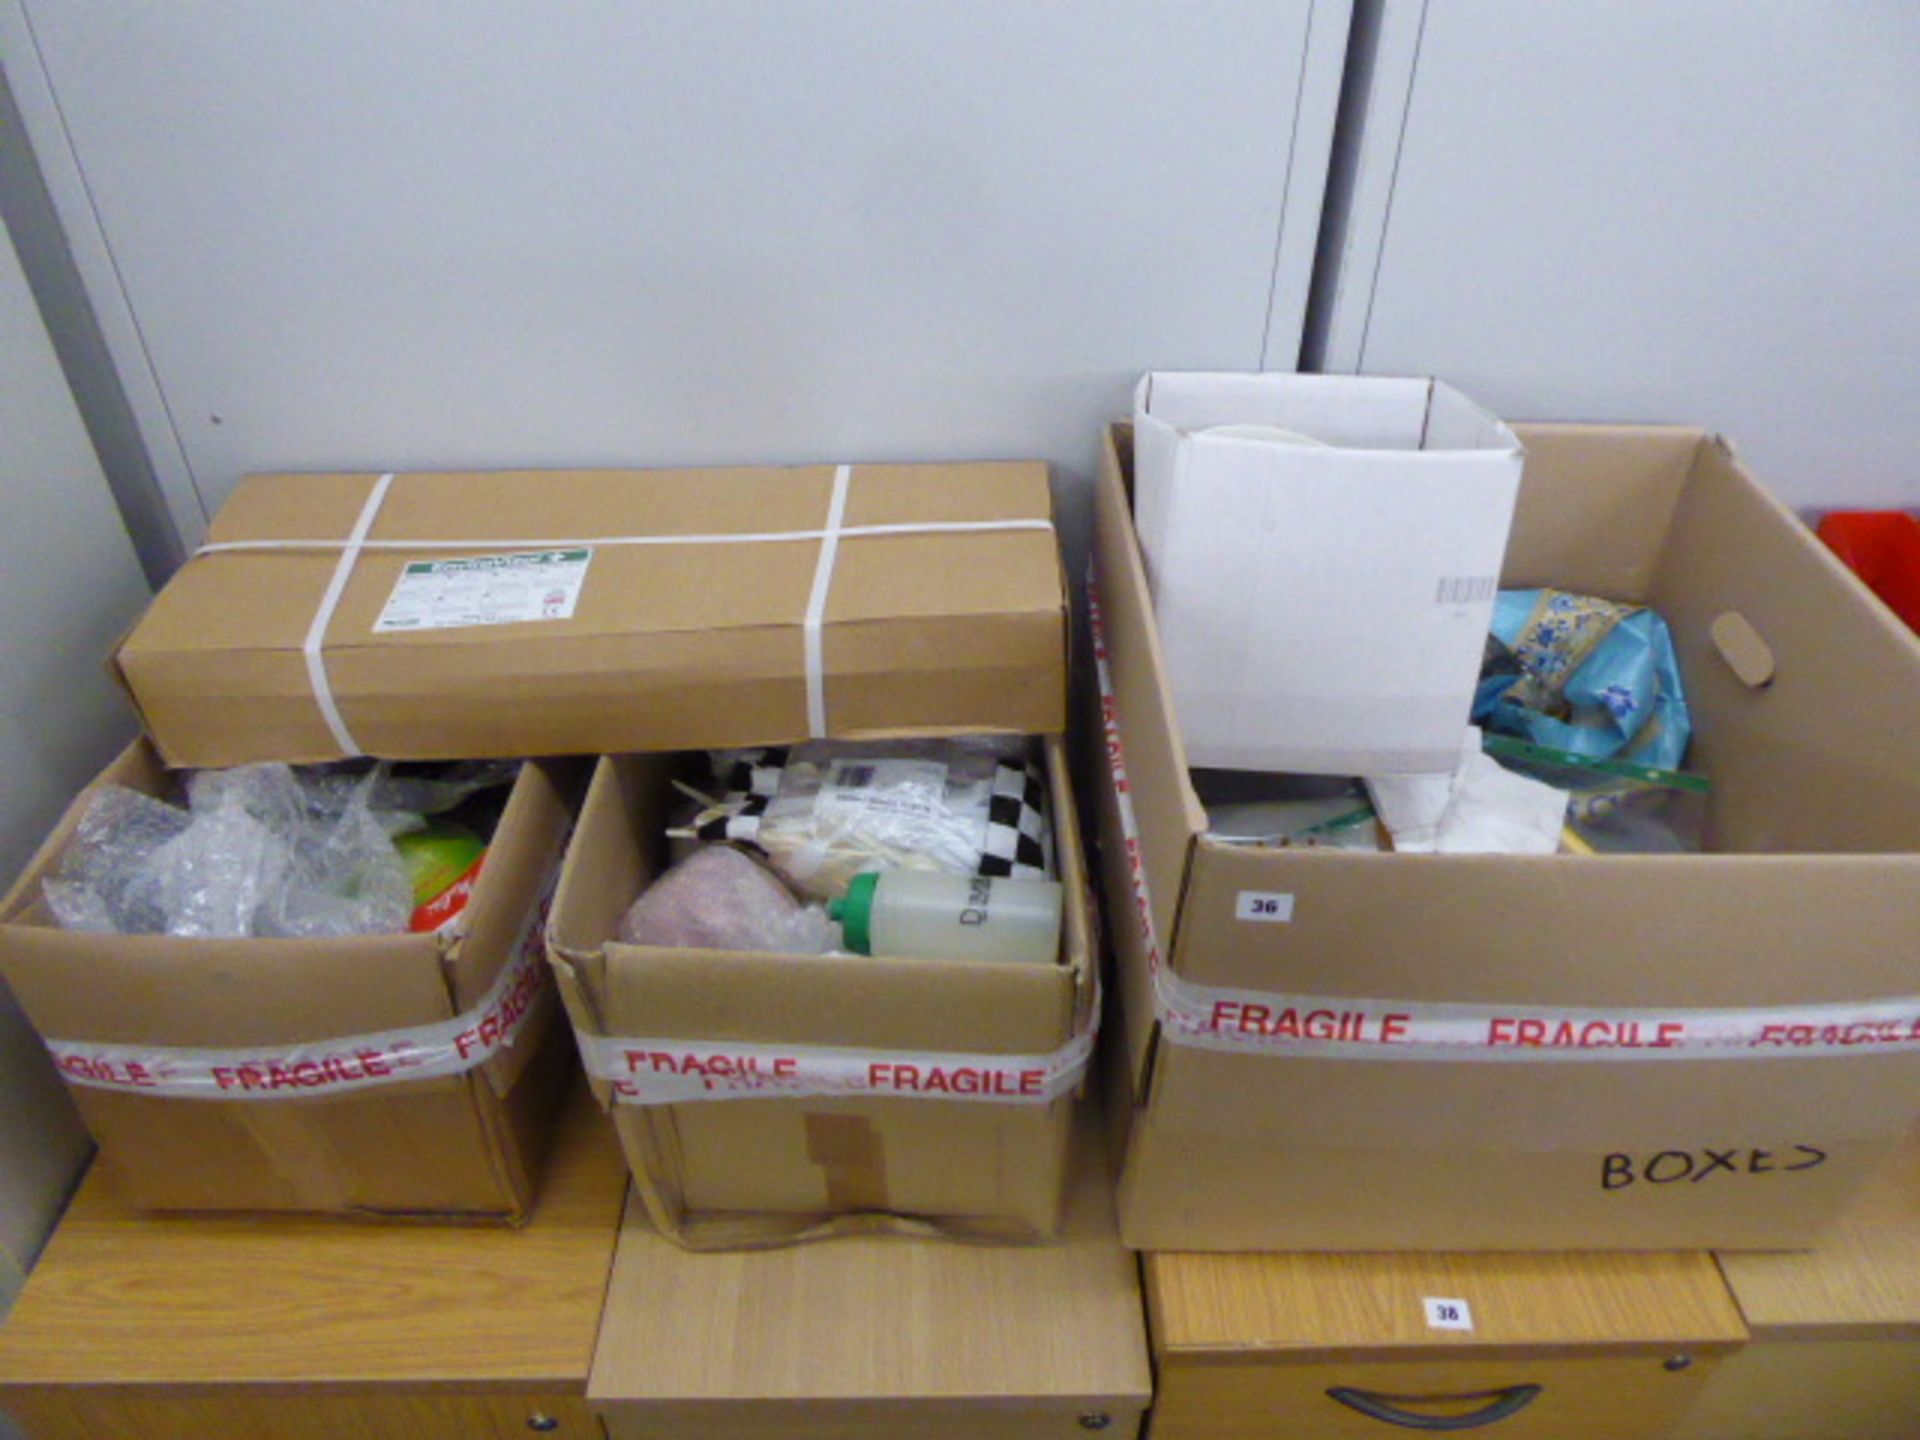 3 boxes of assorted cleaning items, crockery and kitchen items